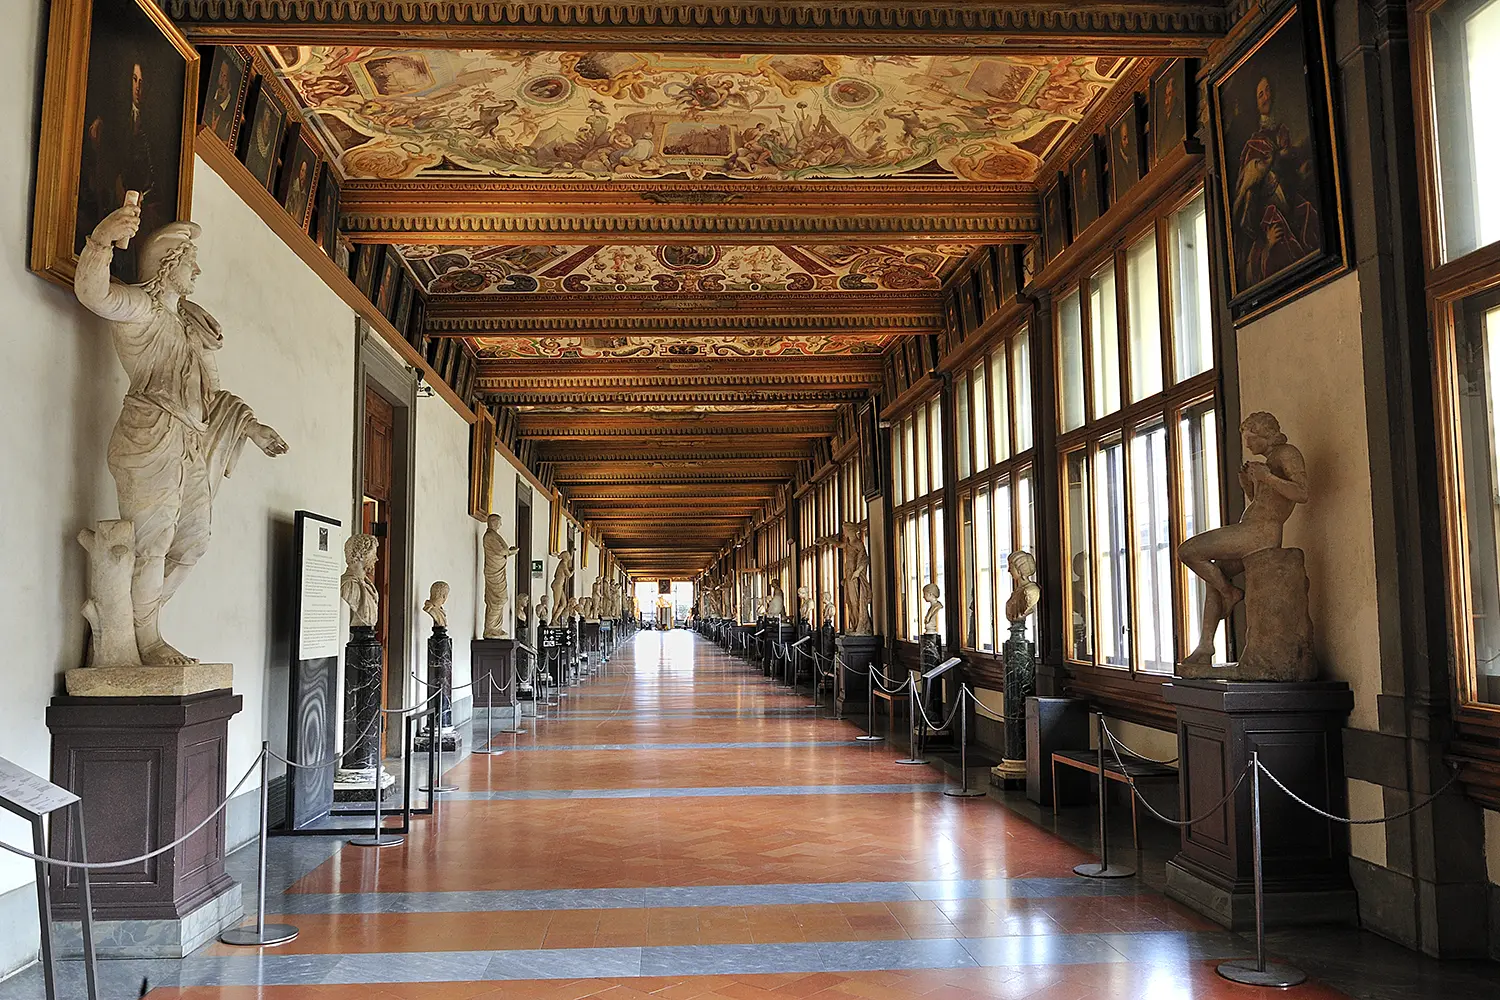 Uffizi Gallery, East Corridor, one of the main museums in Florence